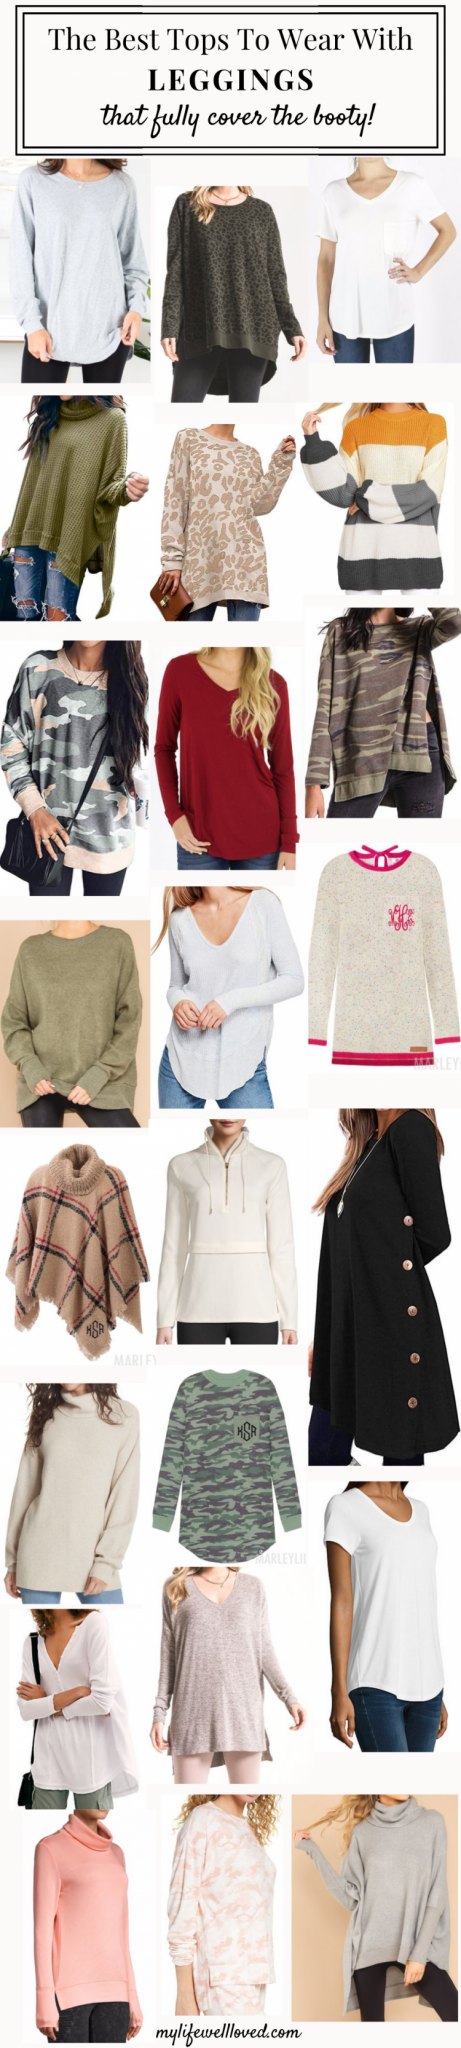 Stylish Tops to Wear with Leggings